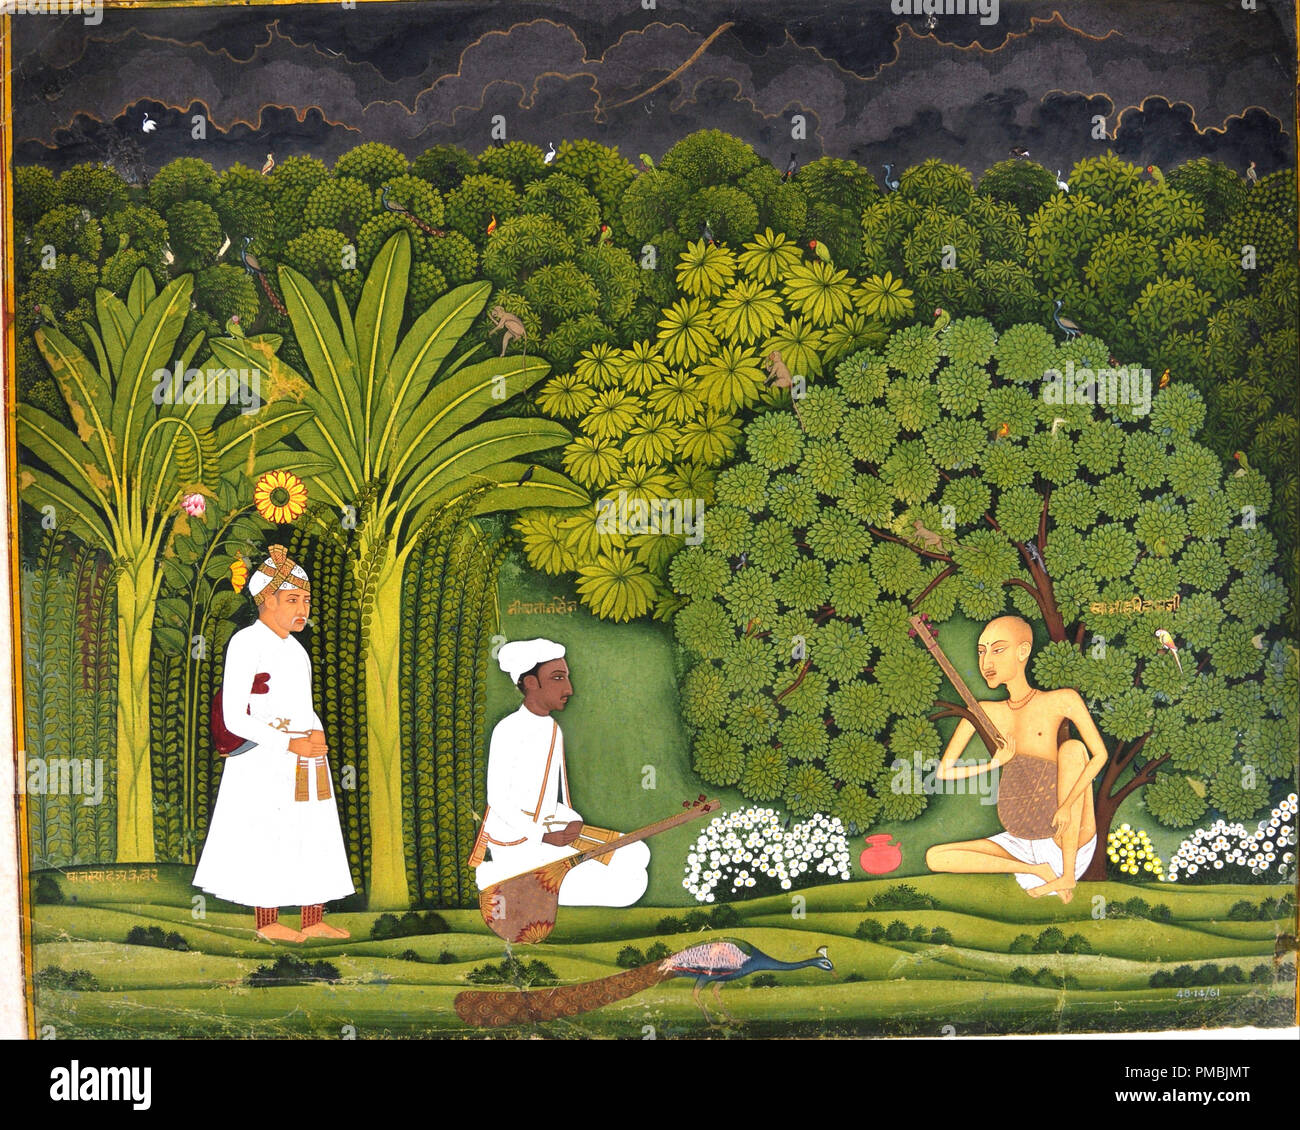 Swami Haridasa with Tansen and Akbar at Vrindavana. Date/Period: 1700 - 1760. Painting. Height: 250 mm (9.84 in); Width: 310 mm (12.20 in). Author: UNKNOWN. Stock Photo